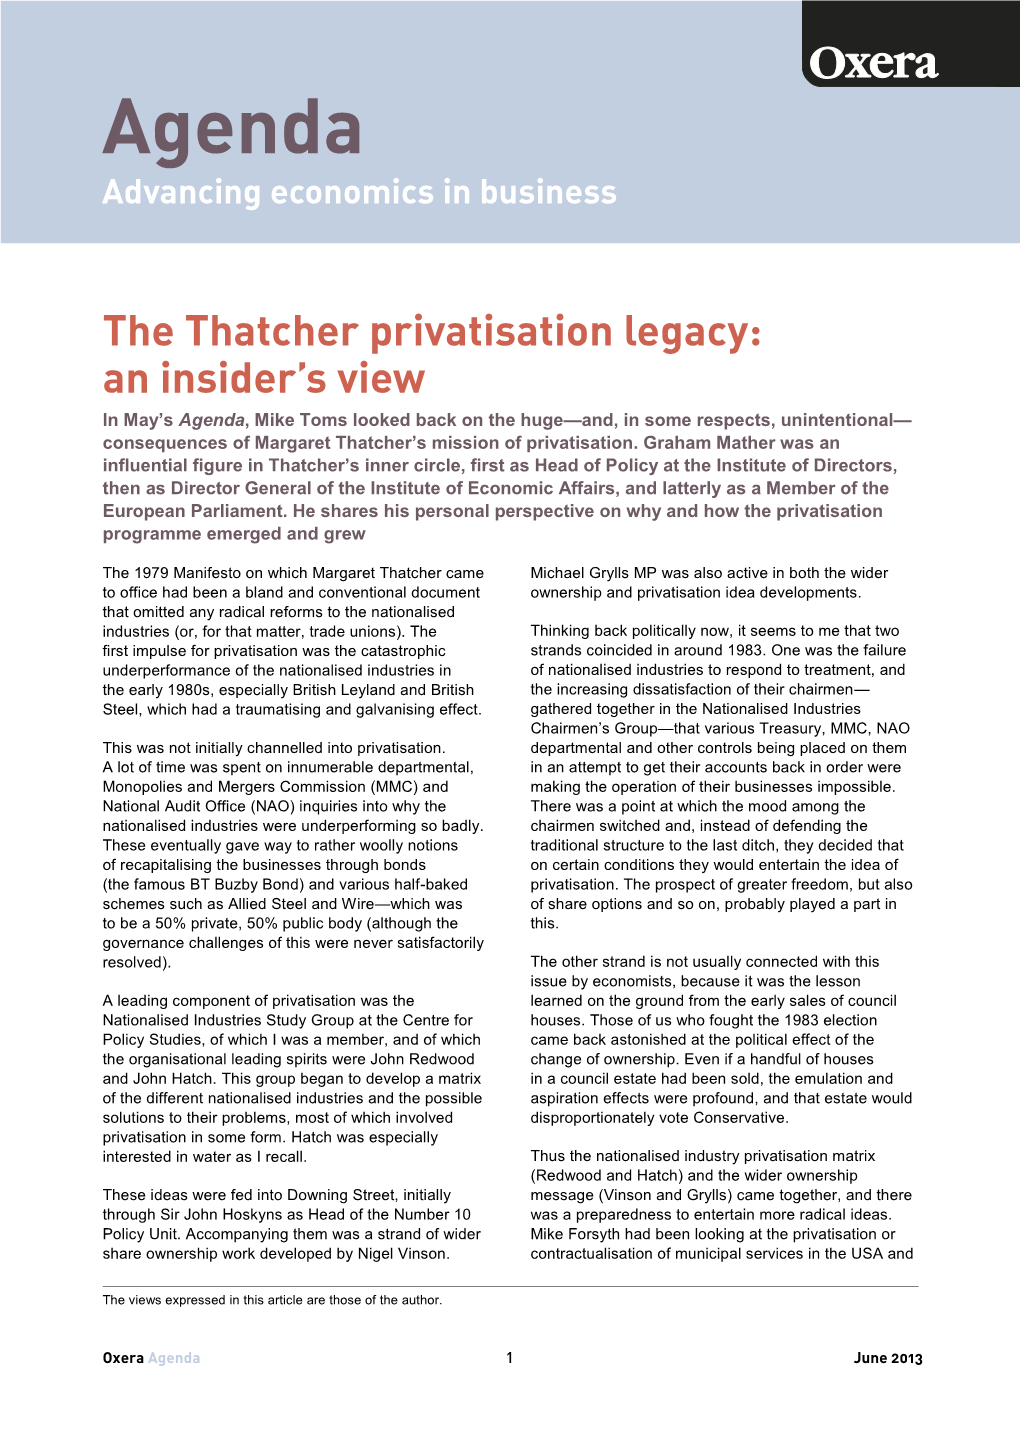 The Thatcher Privatisation Legacy